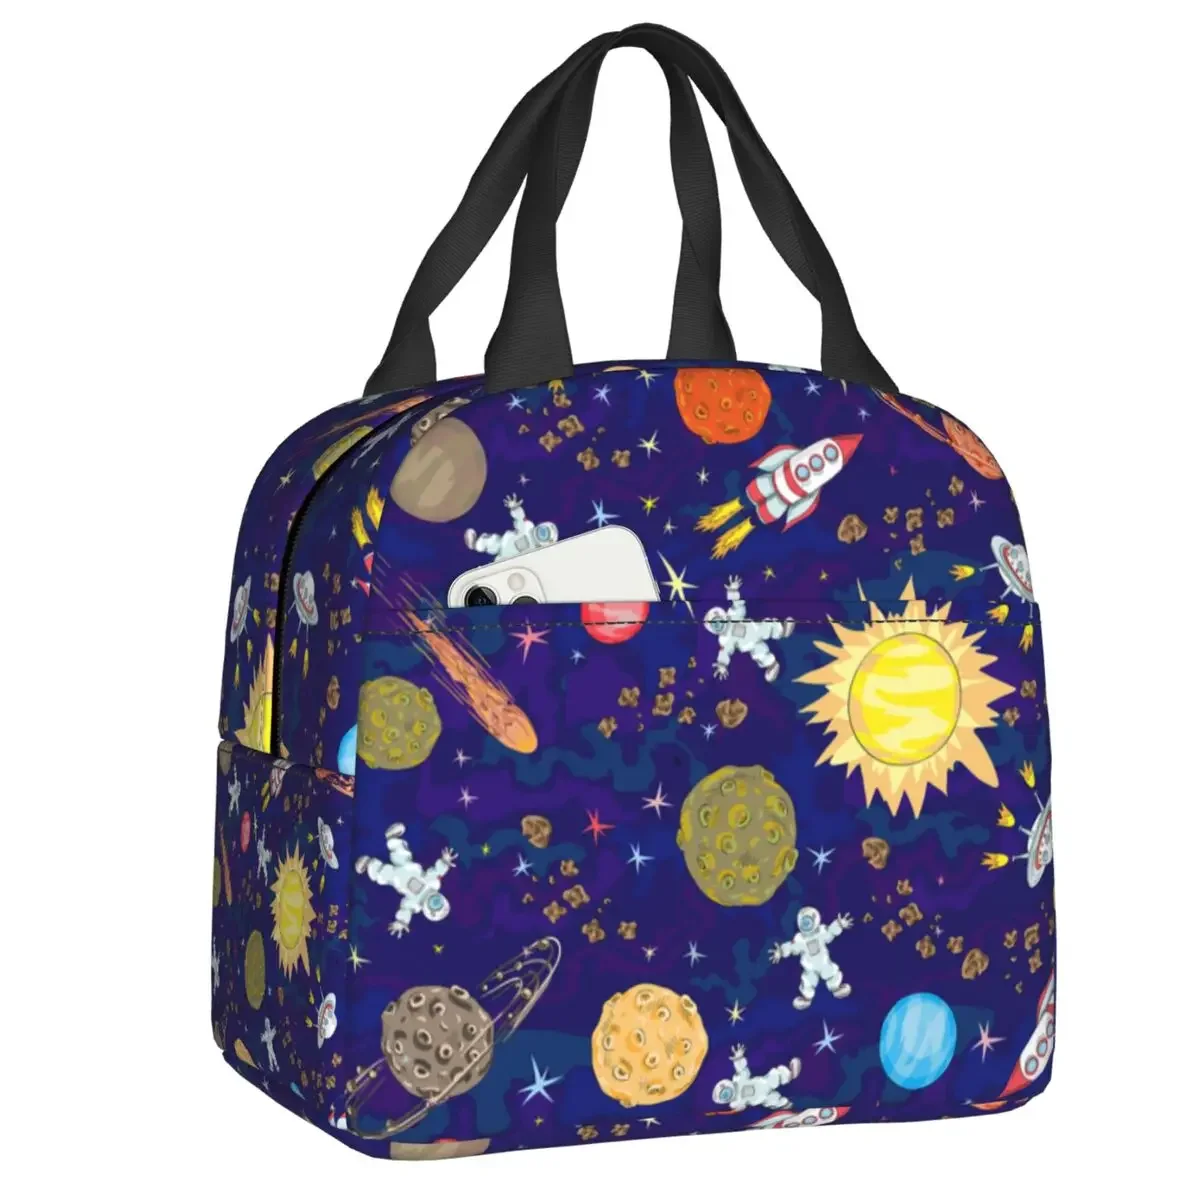 

Cartoon Space Planet Rocket Thermal Insulated Lunch Bag Women Astronaut Spaceship Portable Lunch Box for Kids School Food Bags